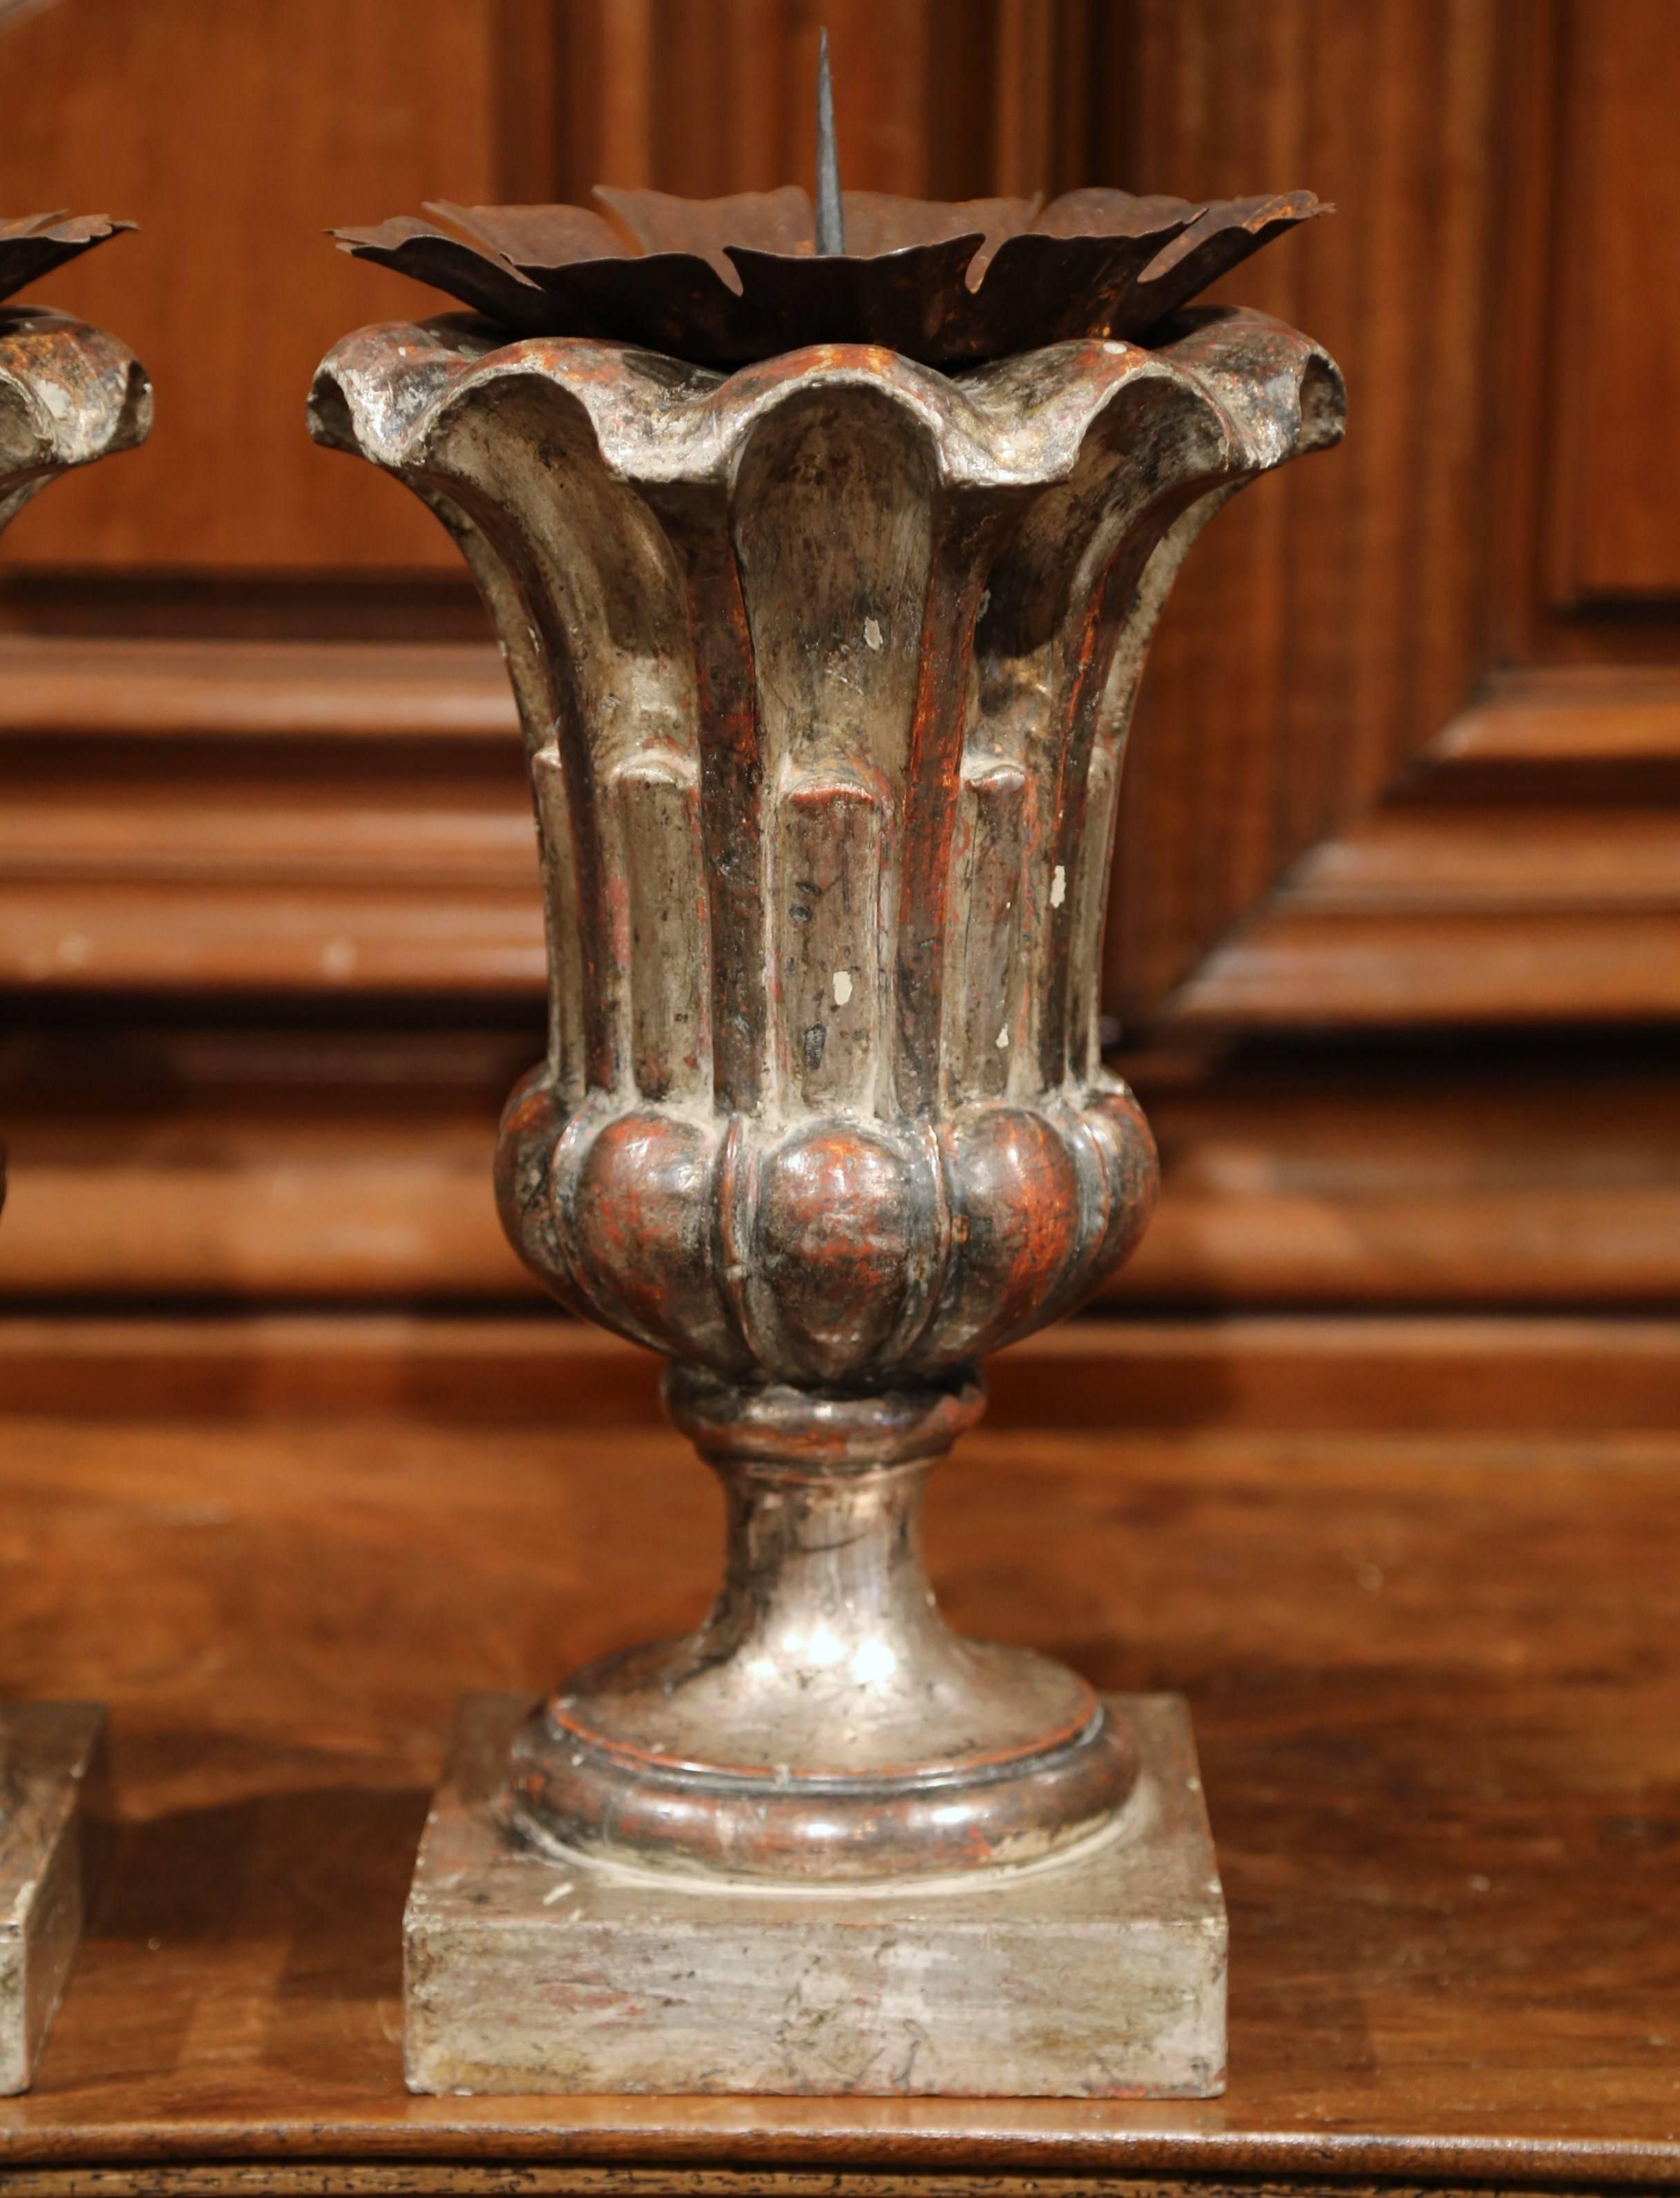 Silvered Pair of Italian Hand-Carved Silver Leaf Pricket Candlesticks with Metal Bobeches